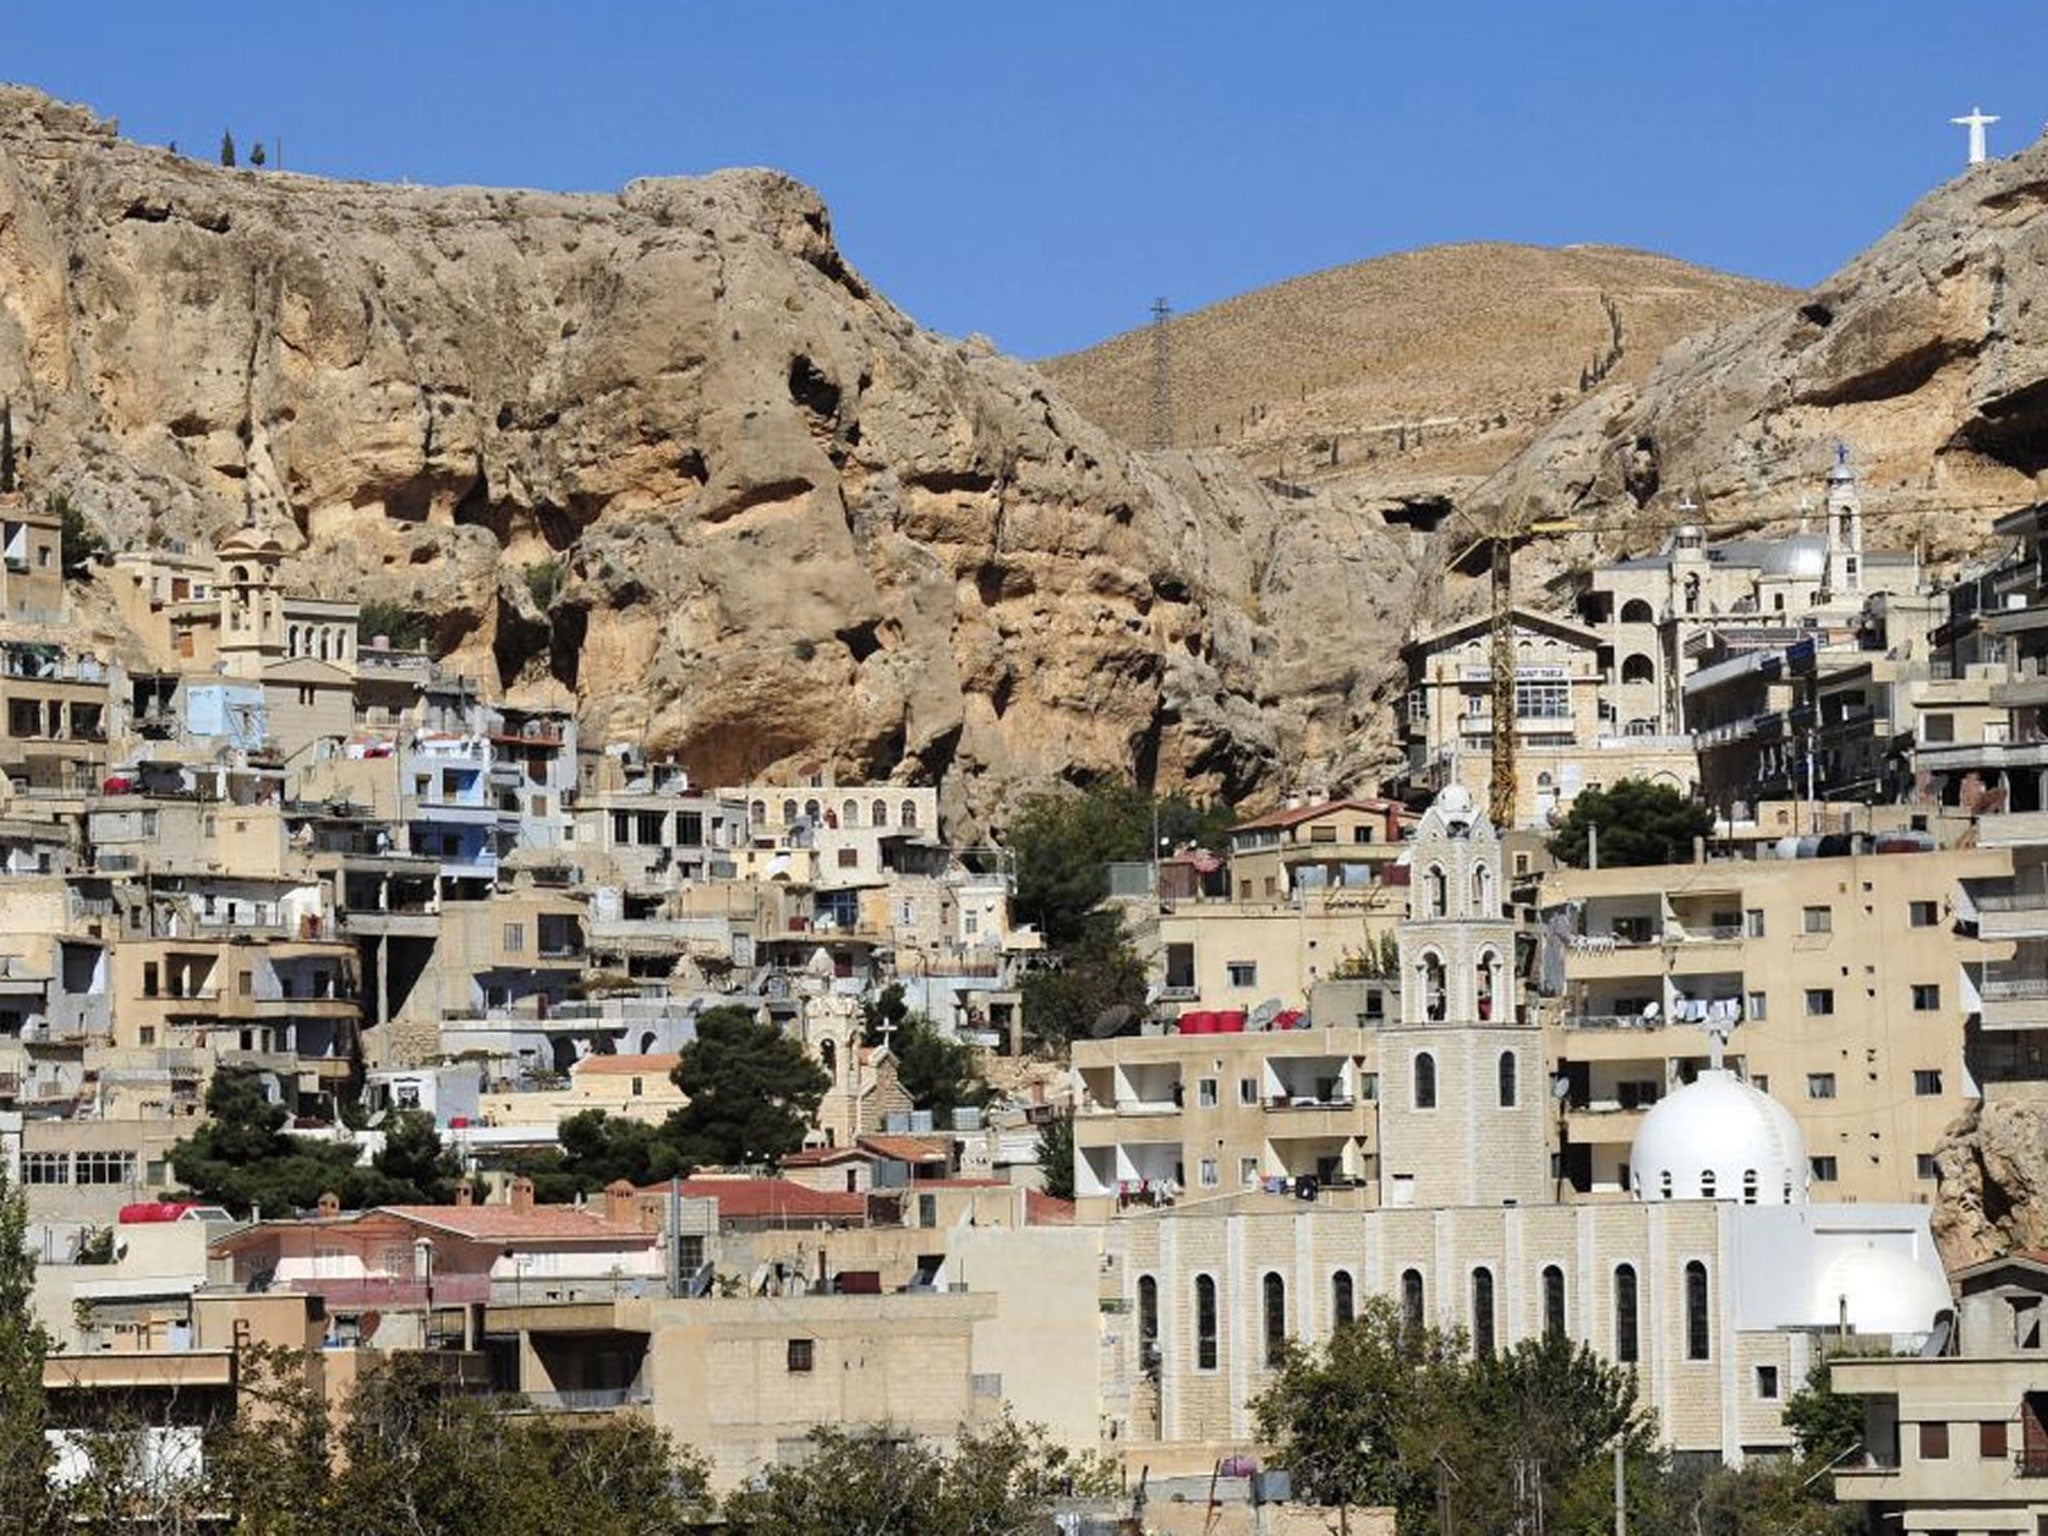 No refuge: The ancient town of Maloula, attacked last week by rebel fighters